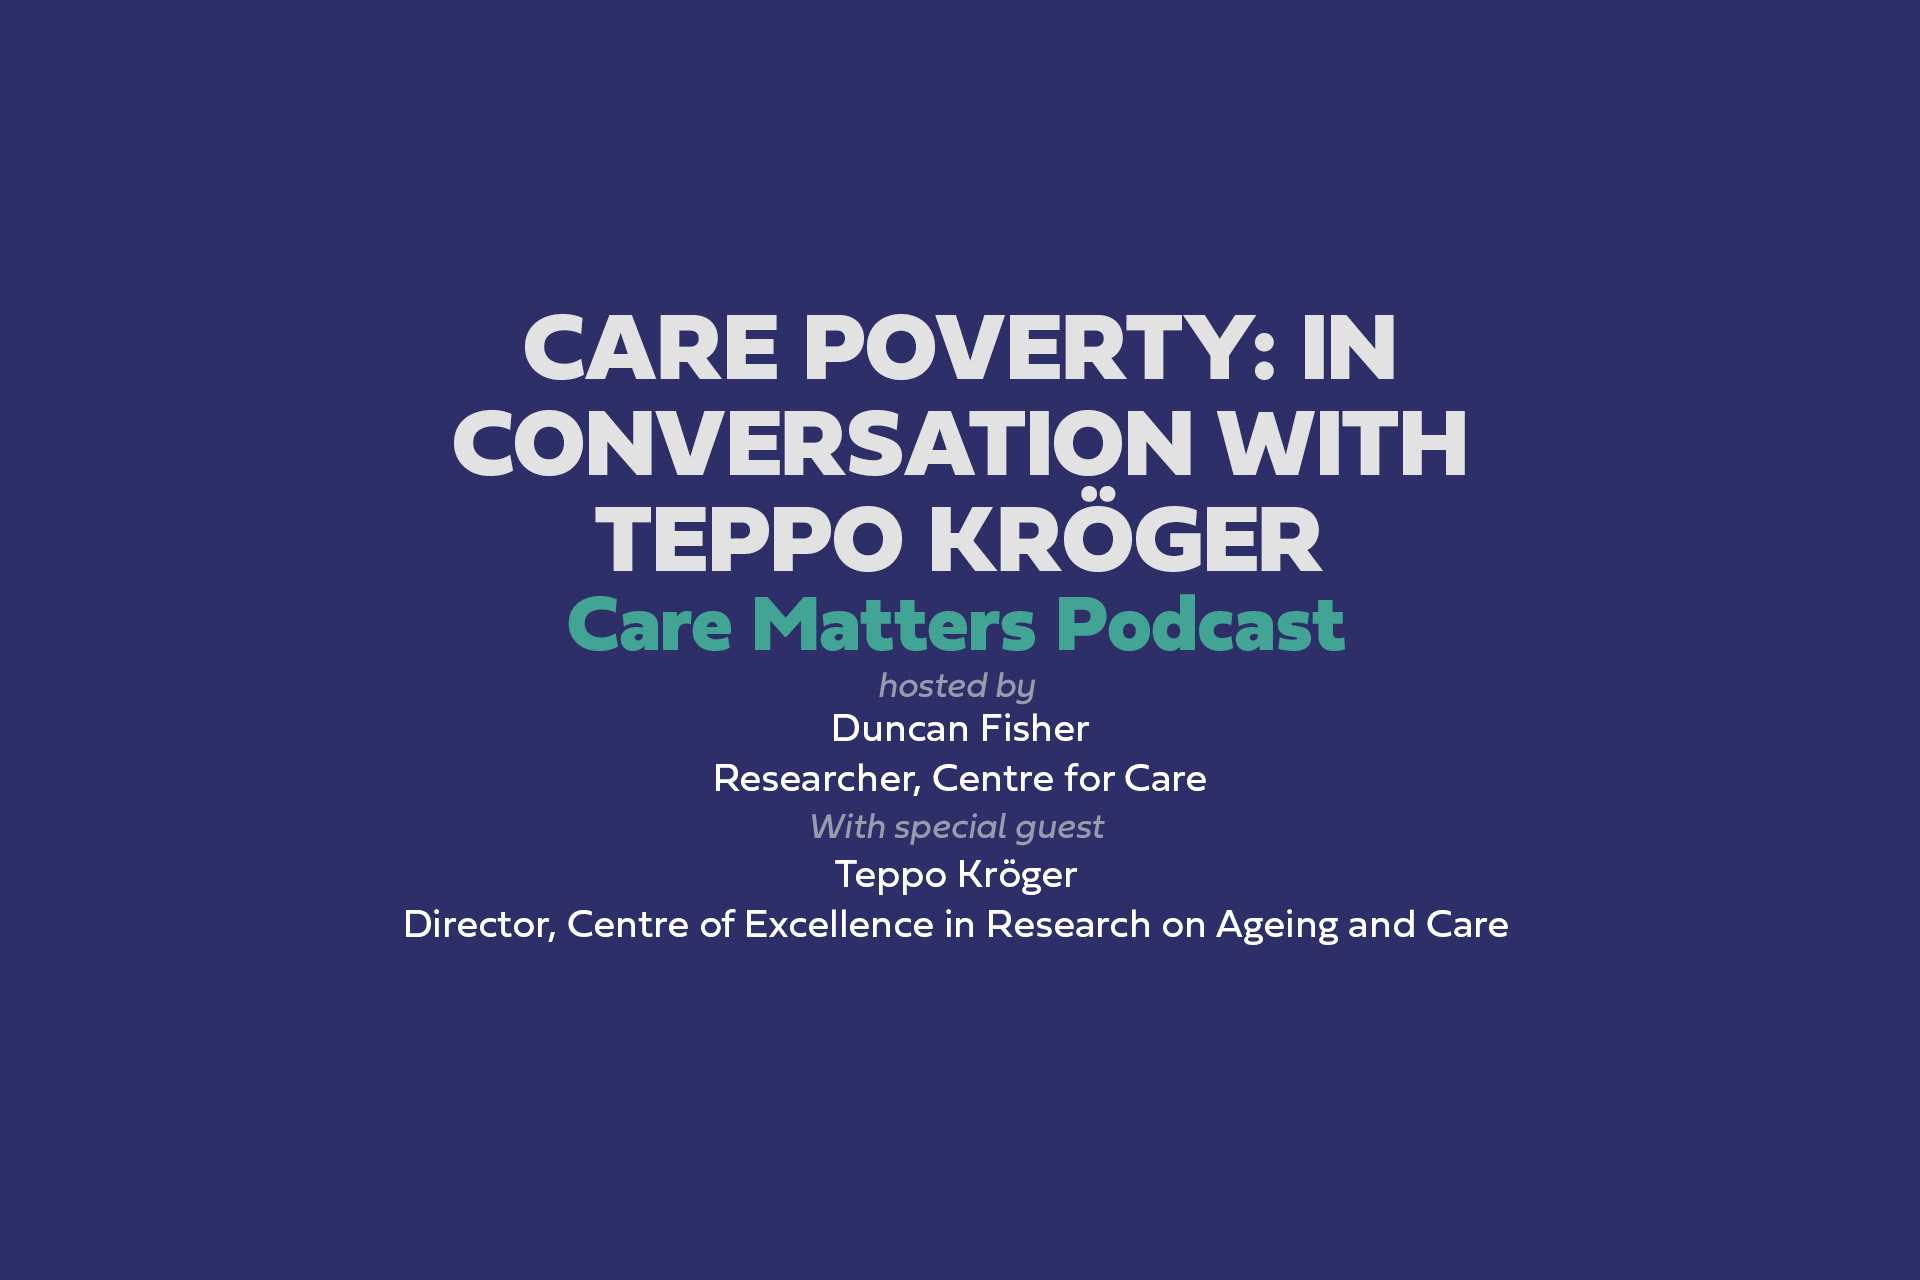 Care poverty: in conversation with Teppo Kroger, CARE MATTERS podcast, hosted by Duncan Fisher, with special guest Teppo Kroger